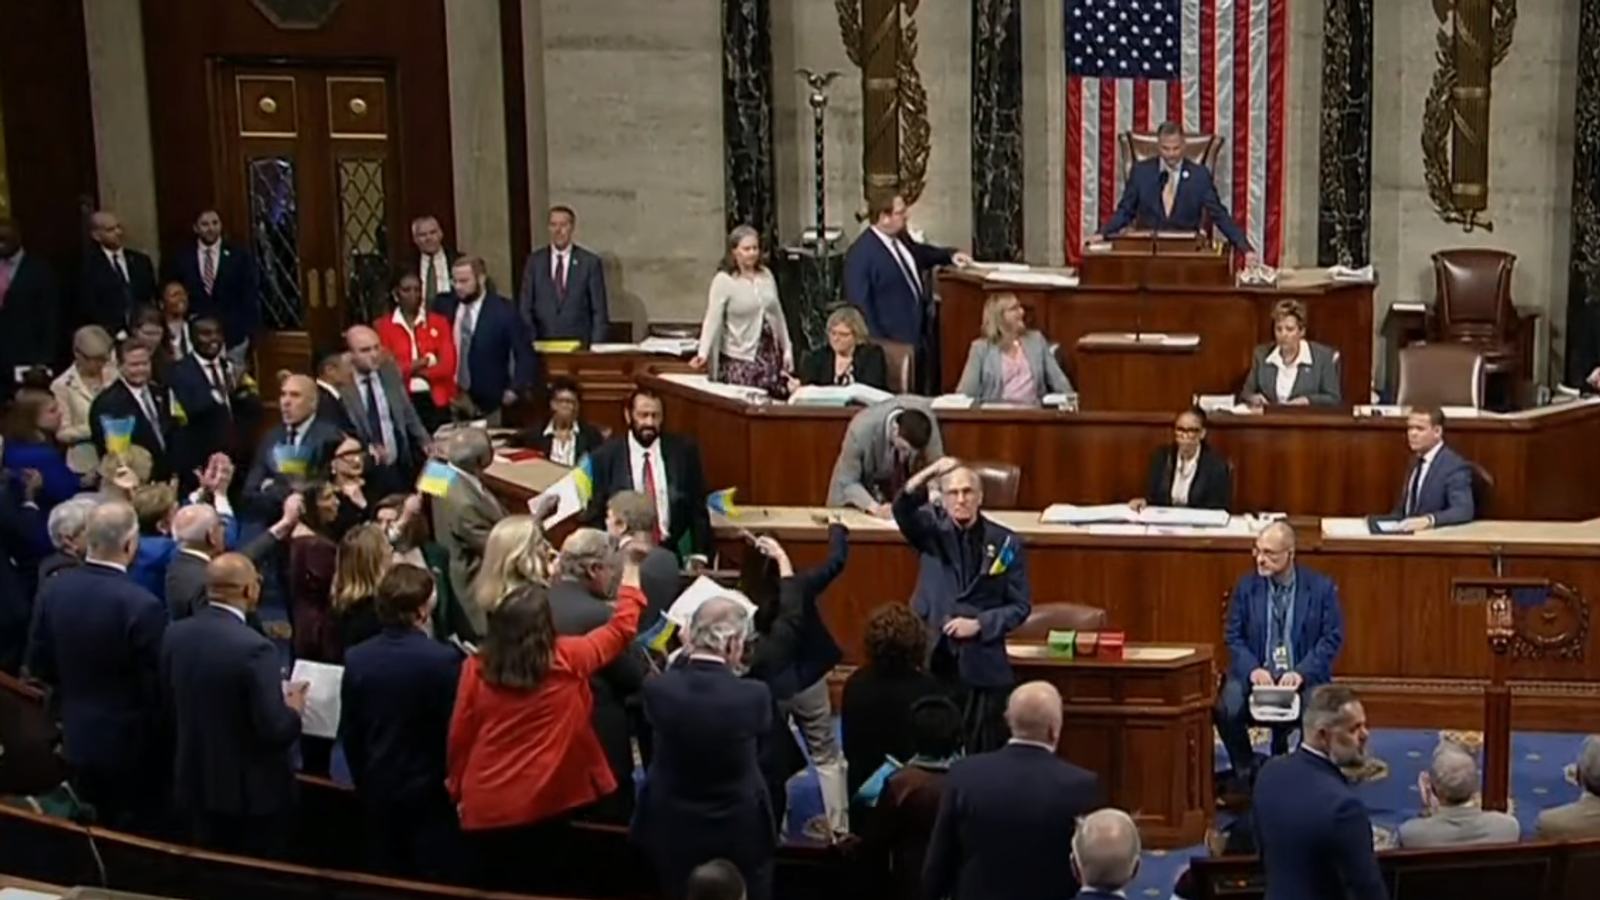 Crucial .8bn Ukraine aid package approved by US House of Representatives after months of deadlock